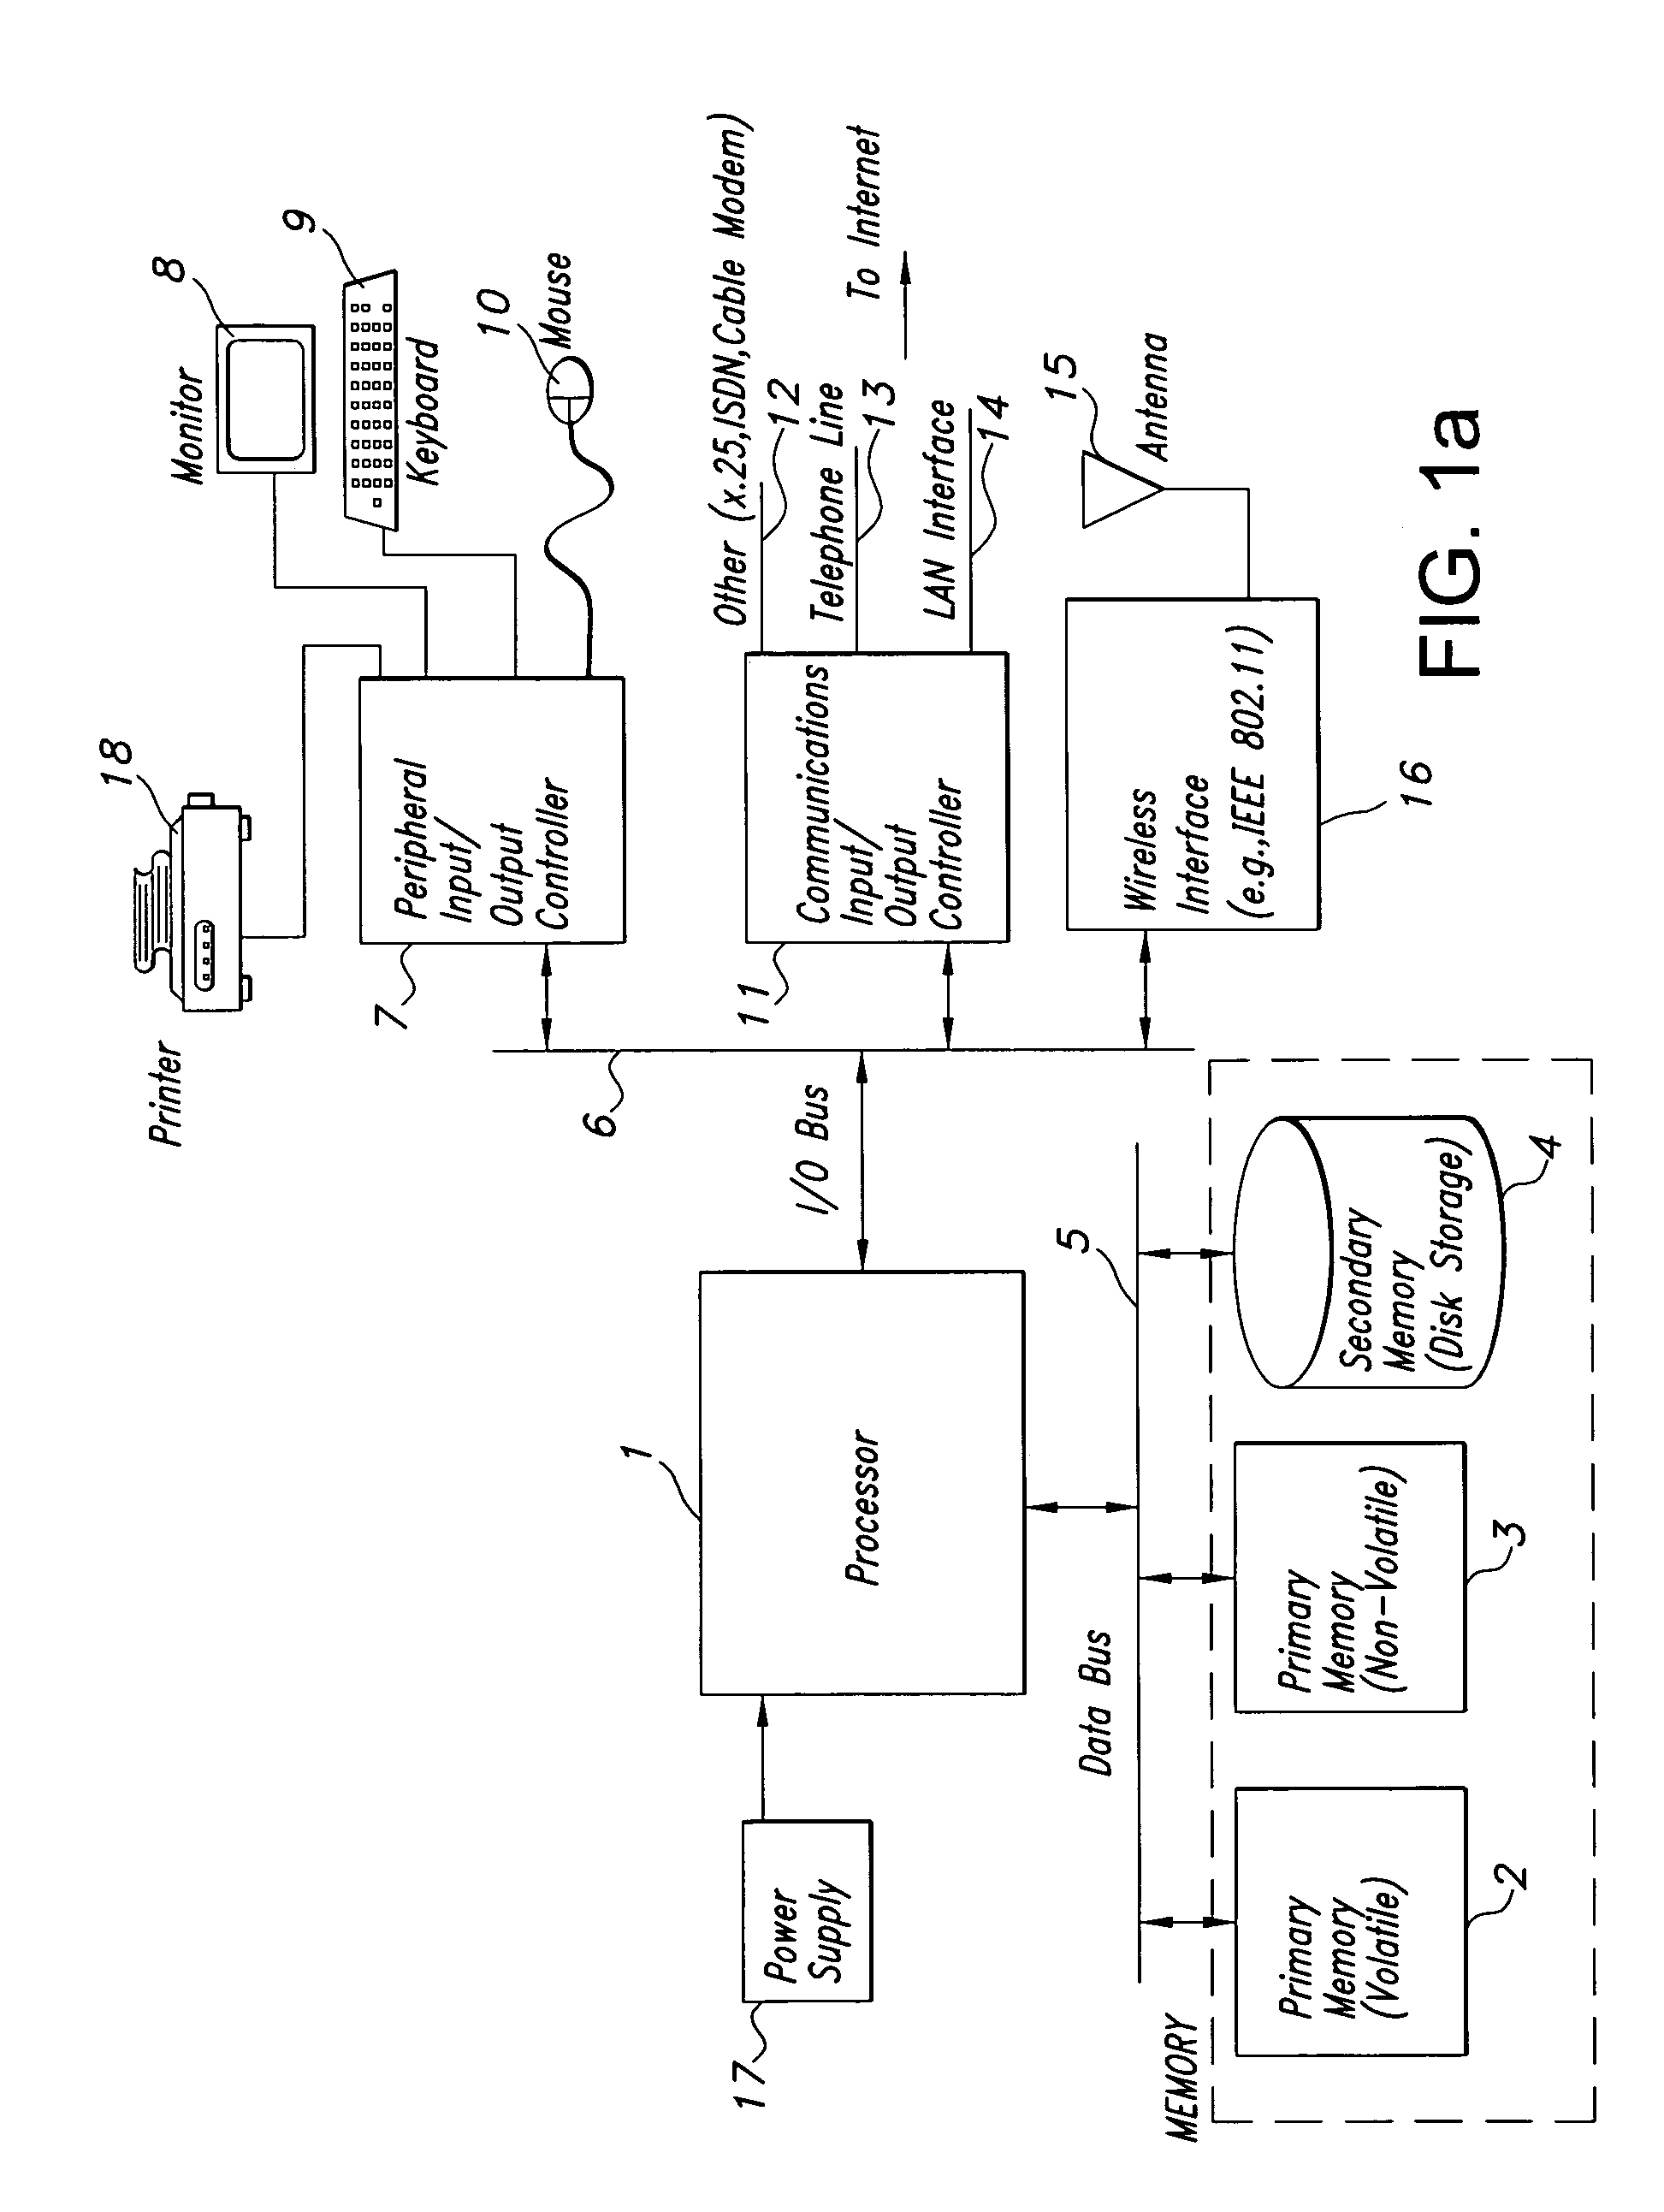 Proof of presence and confirmation of parcel delivery systems and methods